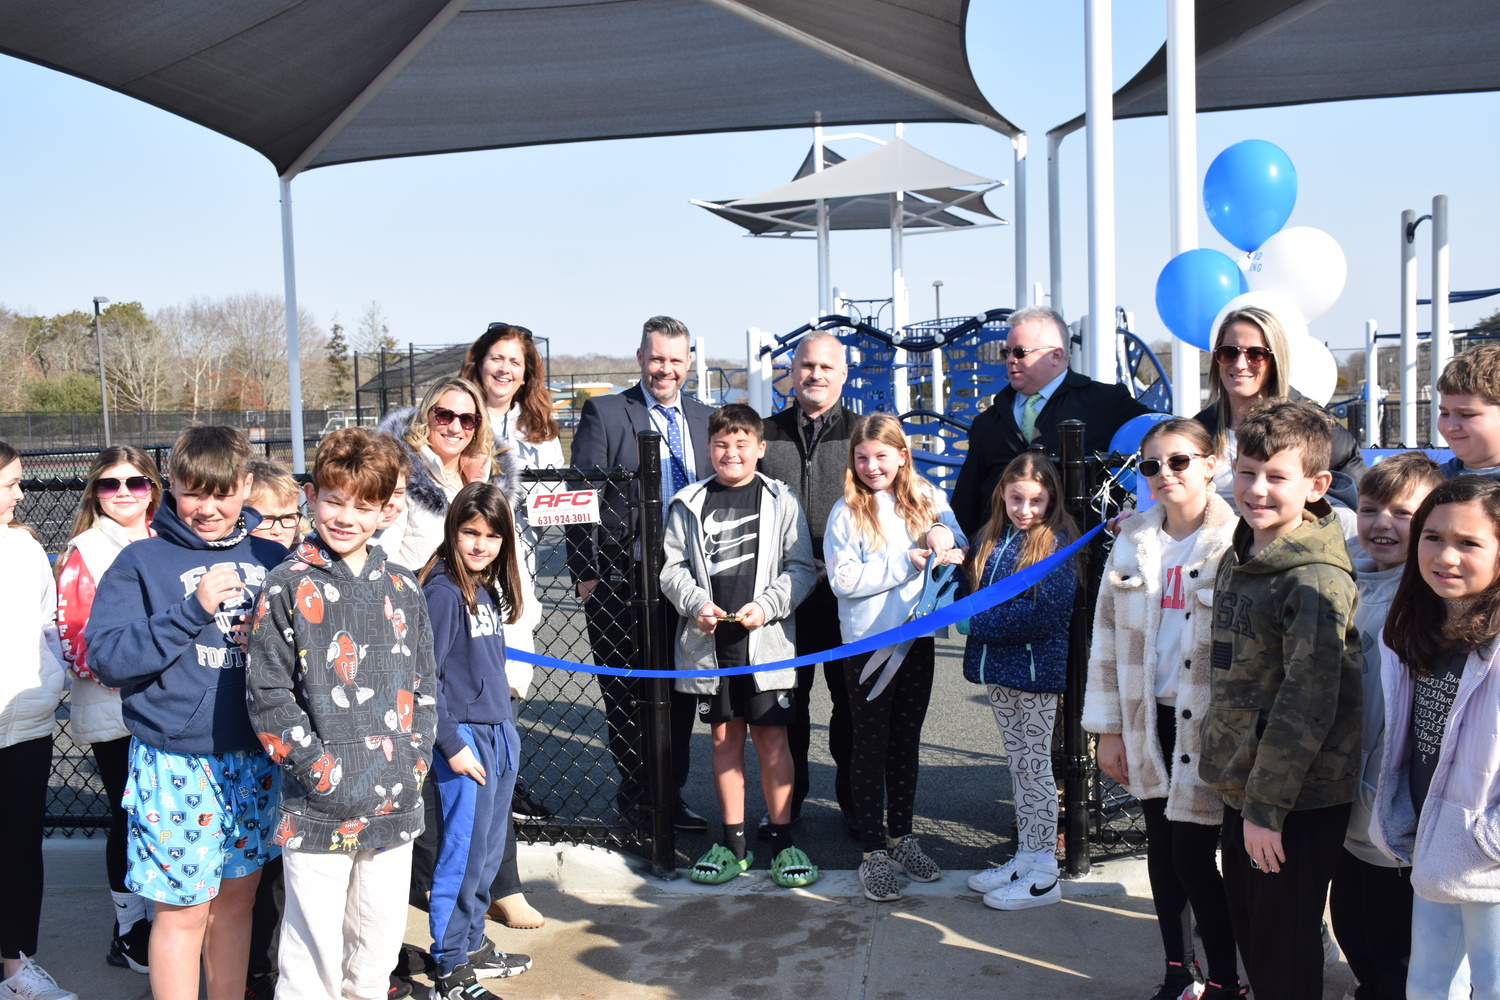 Center, from left, Eastport Elementary School Principal Thomas Fabian, Eastport-South Manor Board of Education Vice President Cristina Costanza, Board of Education President James Governali and Superintendent of Schools Joseph Steimel,  with students and faculty as they cut the ribbon to open the new playground. COURTESY EASTPORT-SOUTH MANOR SCHOOL DISTRICT